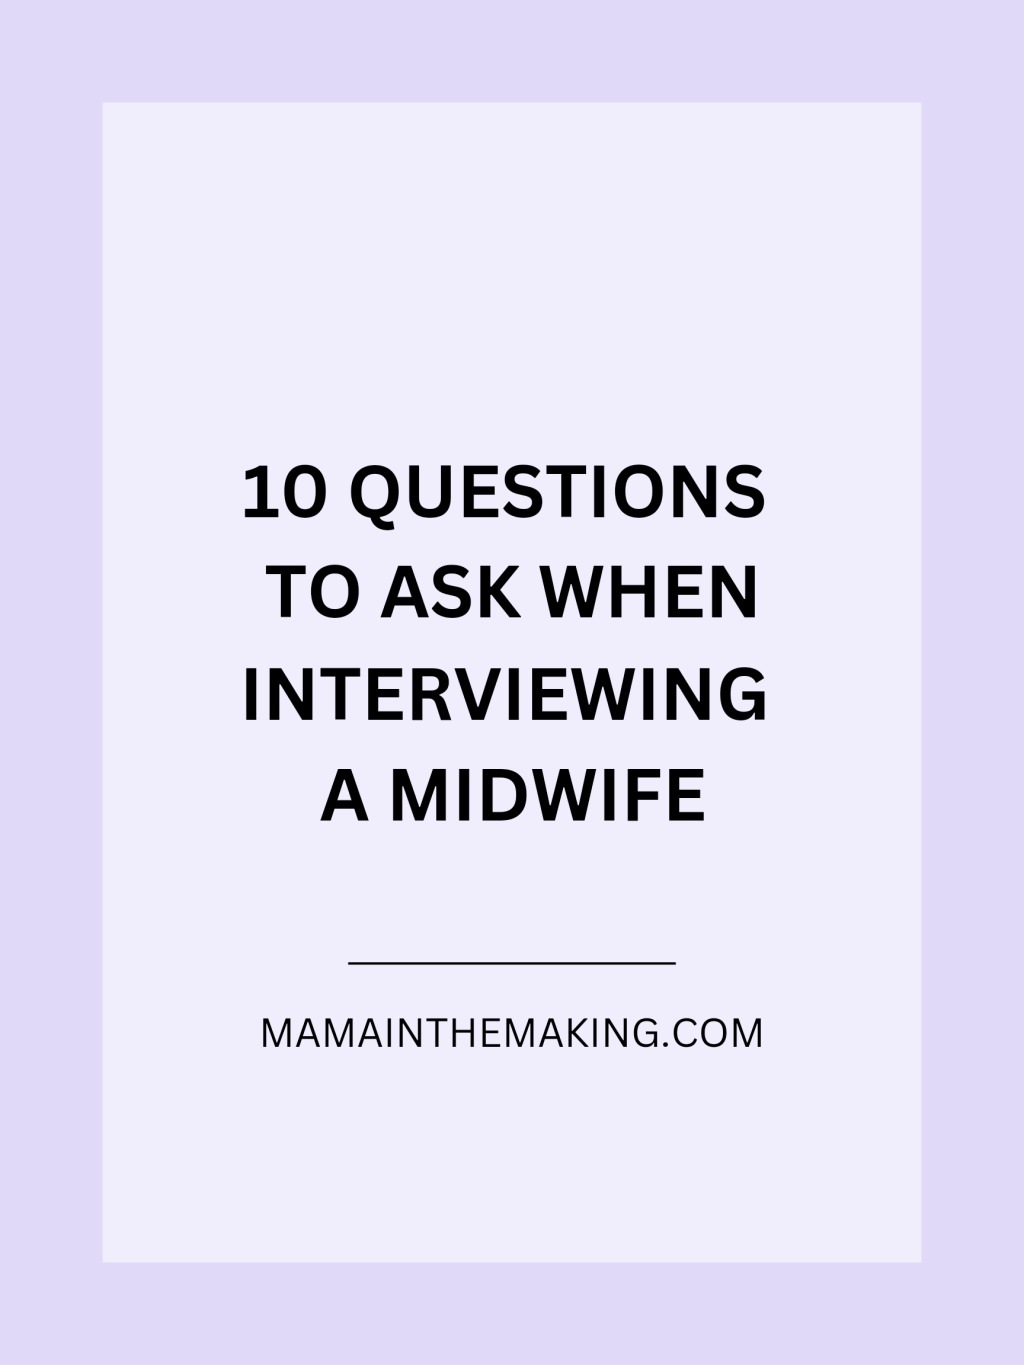 10 Questions to Ask When Interviewing a Midwife